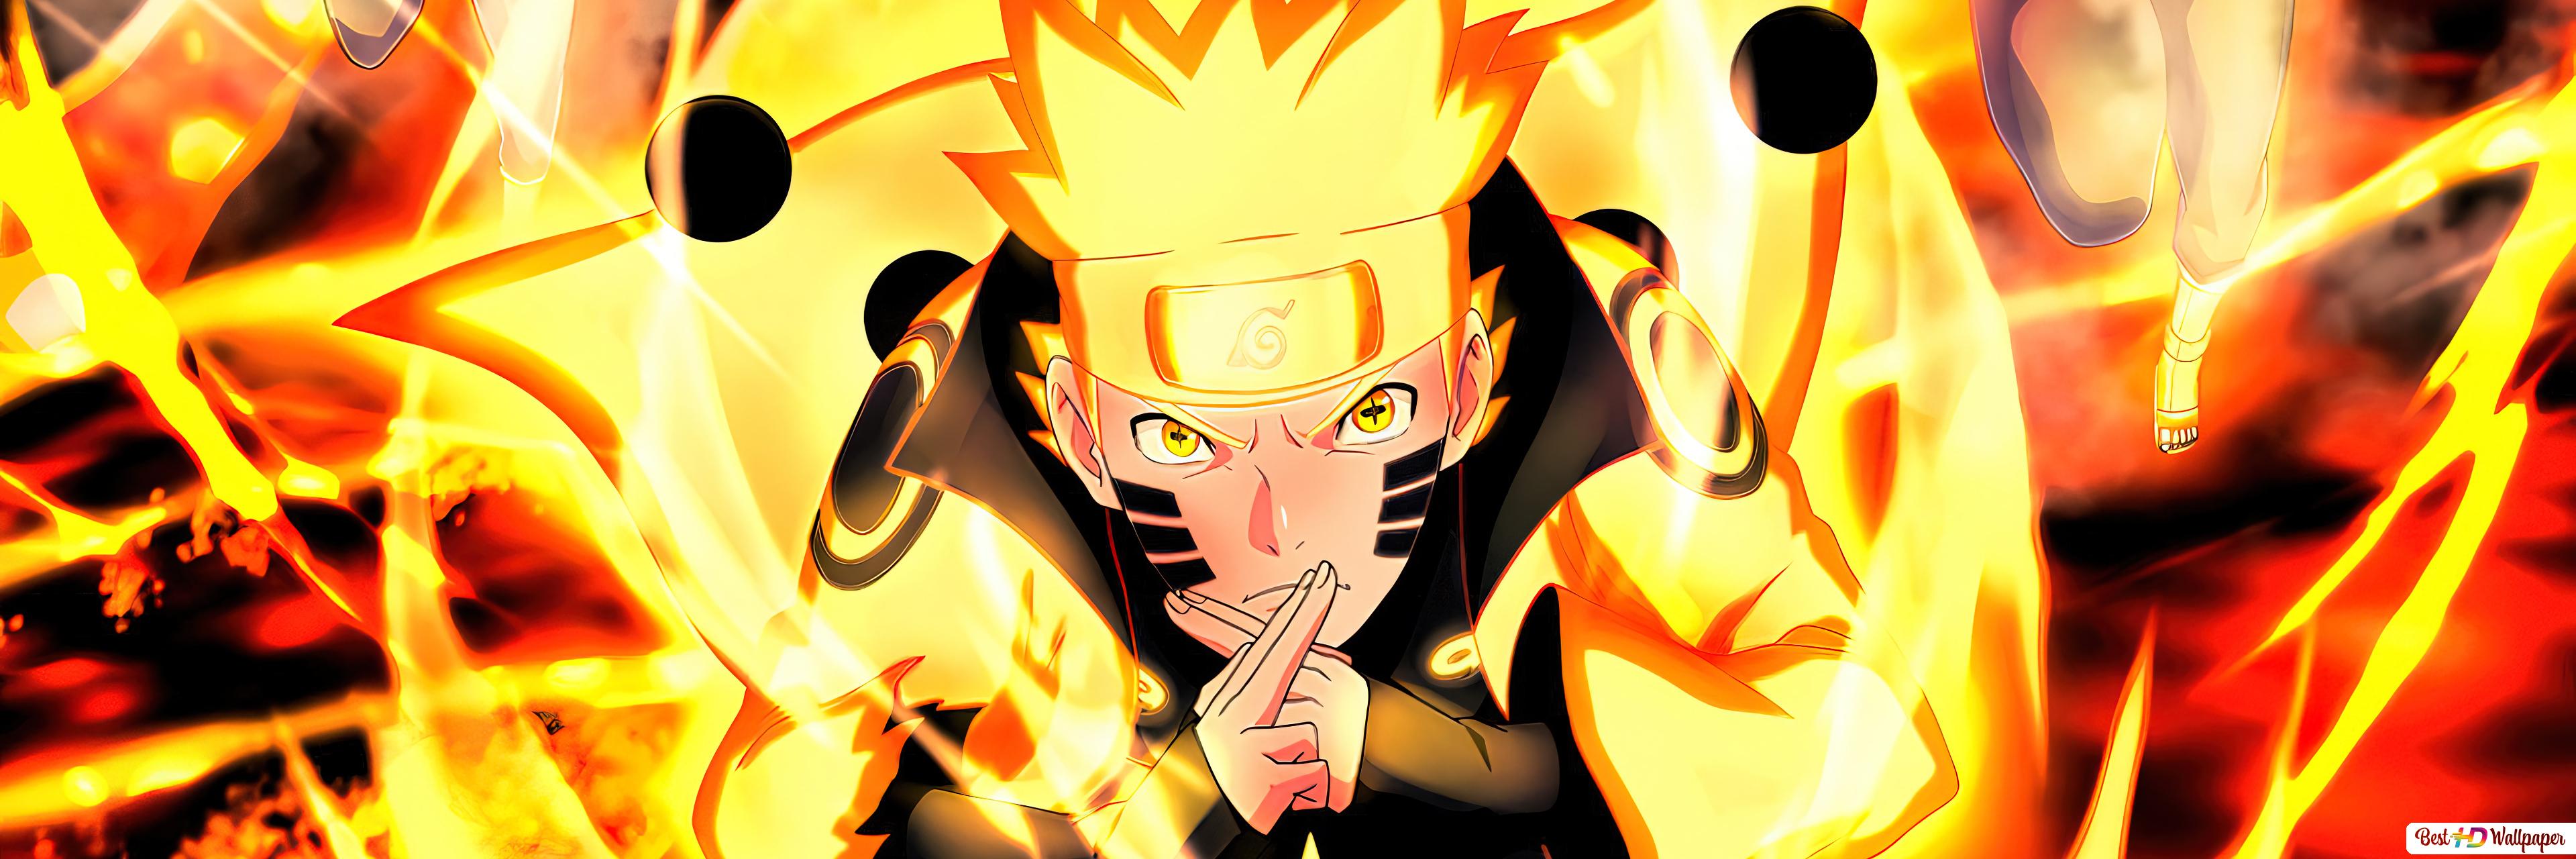 Naruto Sage Of Six Paths Mode Wallpapers - Wallpaper Cave